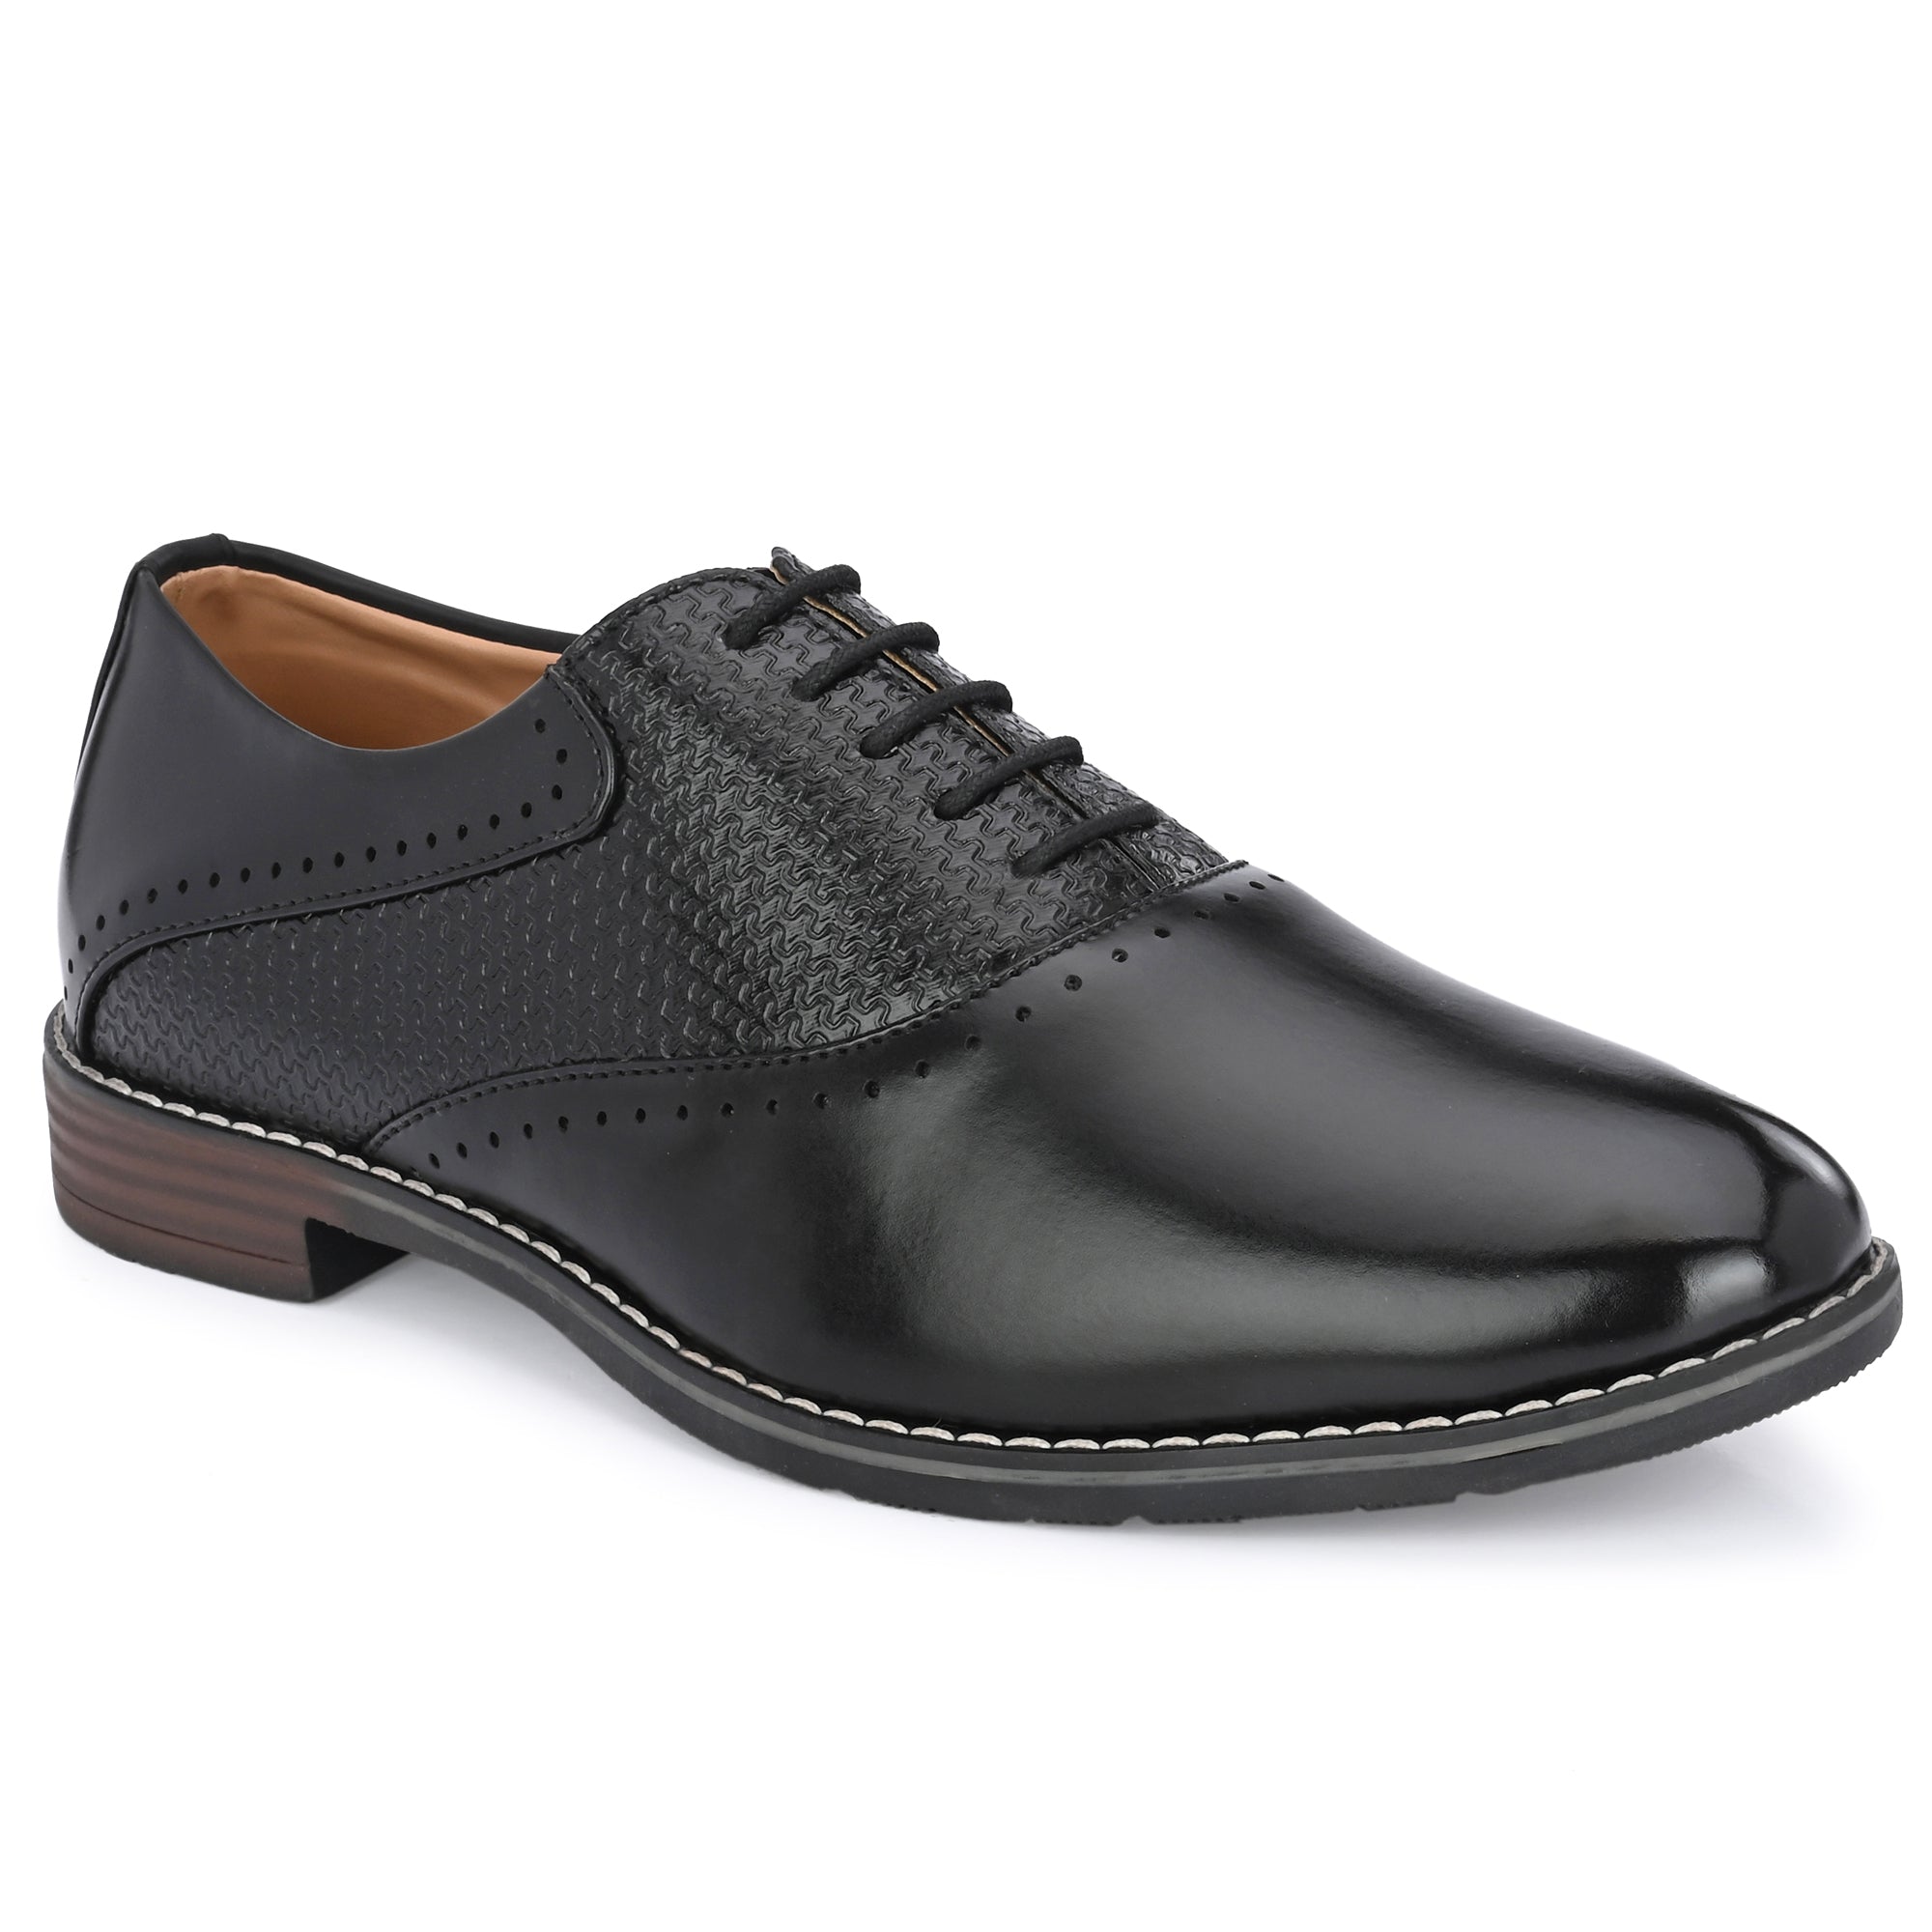 formal-lace-up-attitudist-shoes-for-men-with-semi-chatai-design-3701black